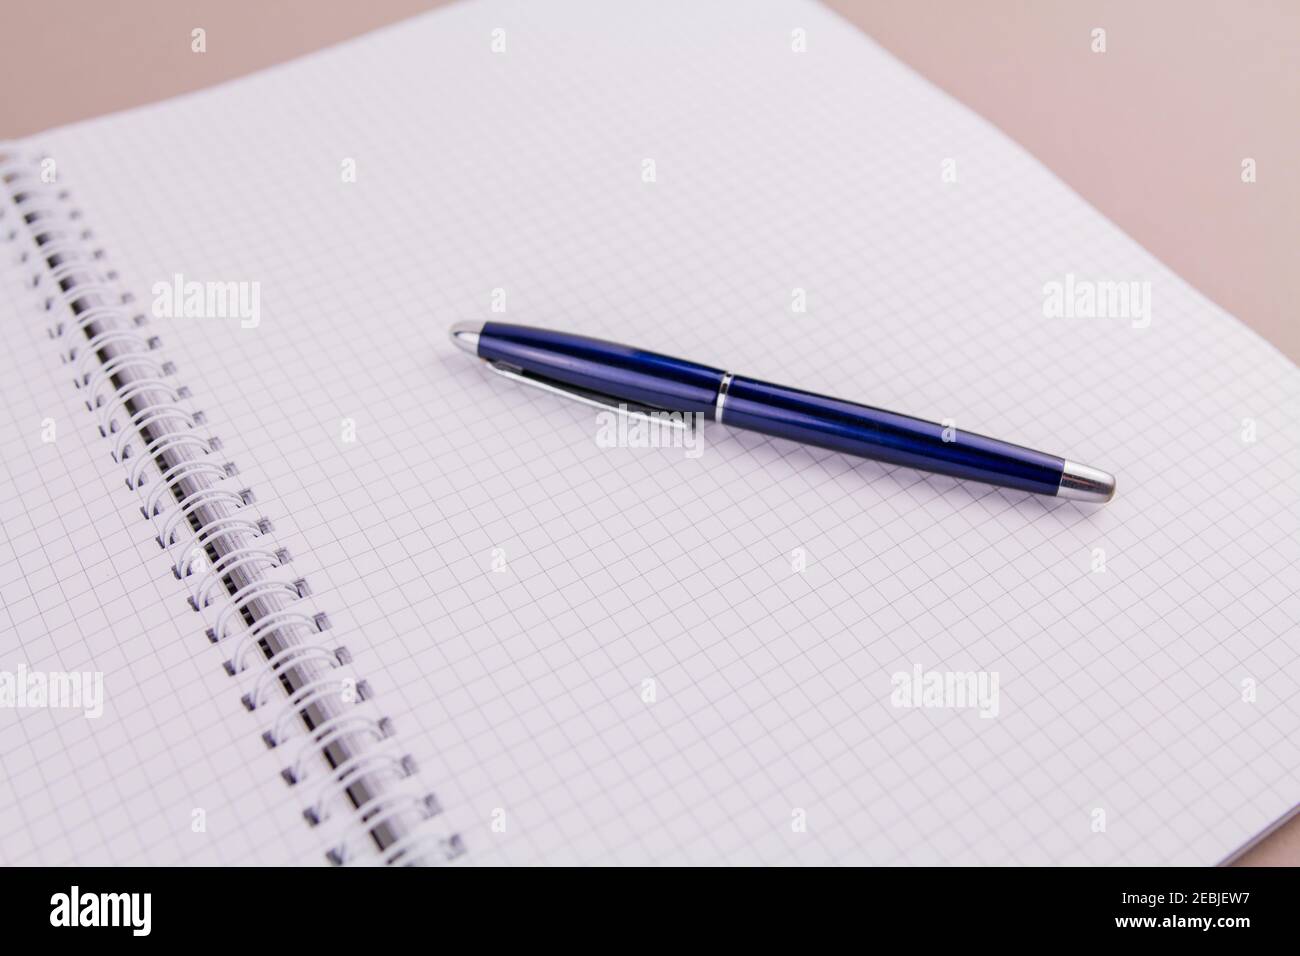 a beautiful pen on a4 notebook for study or work Stock Photo